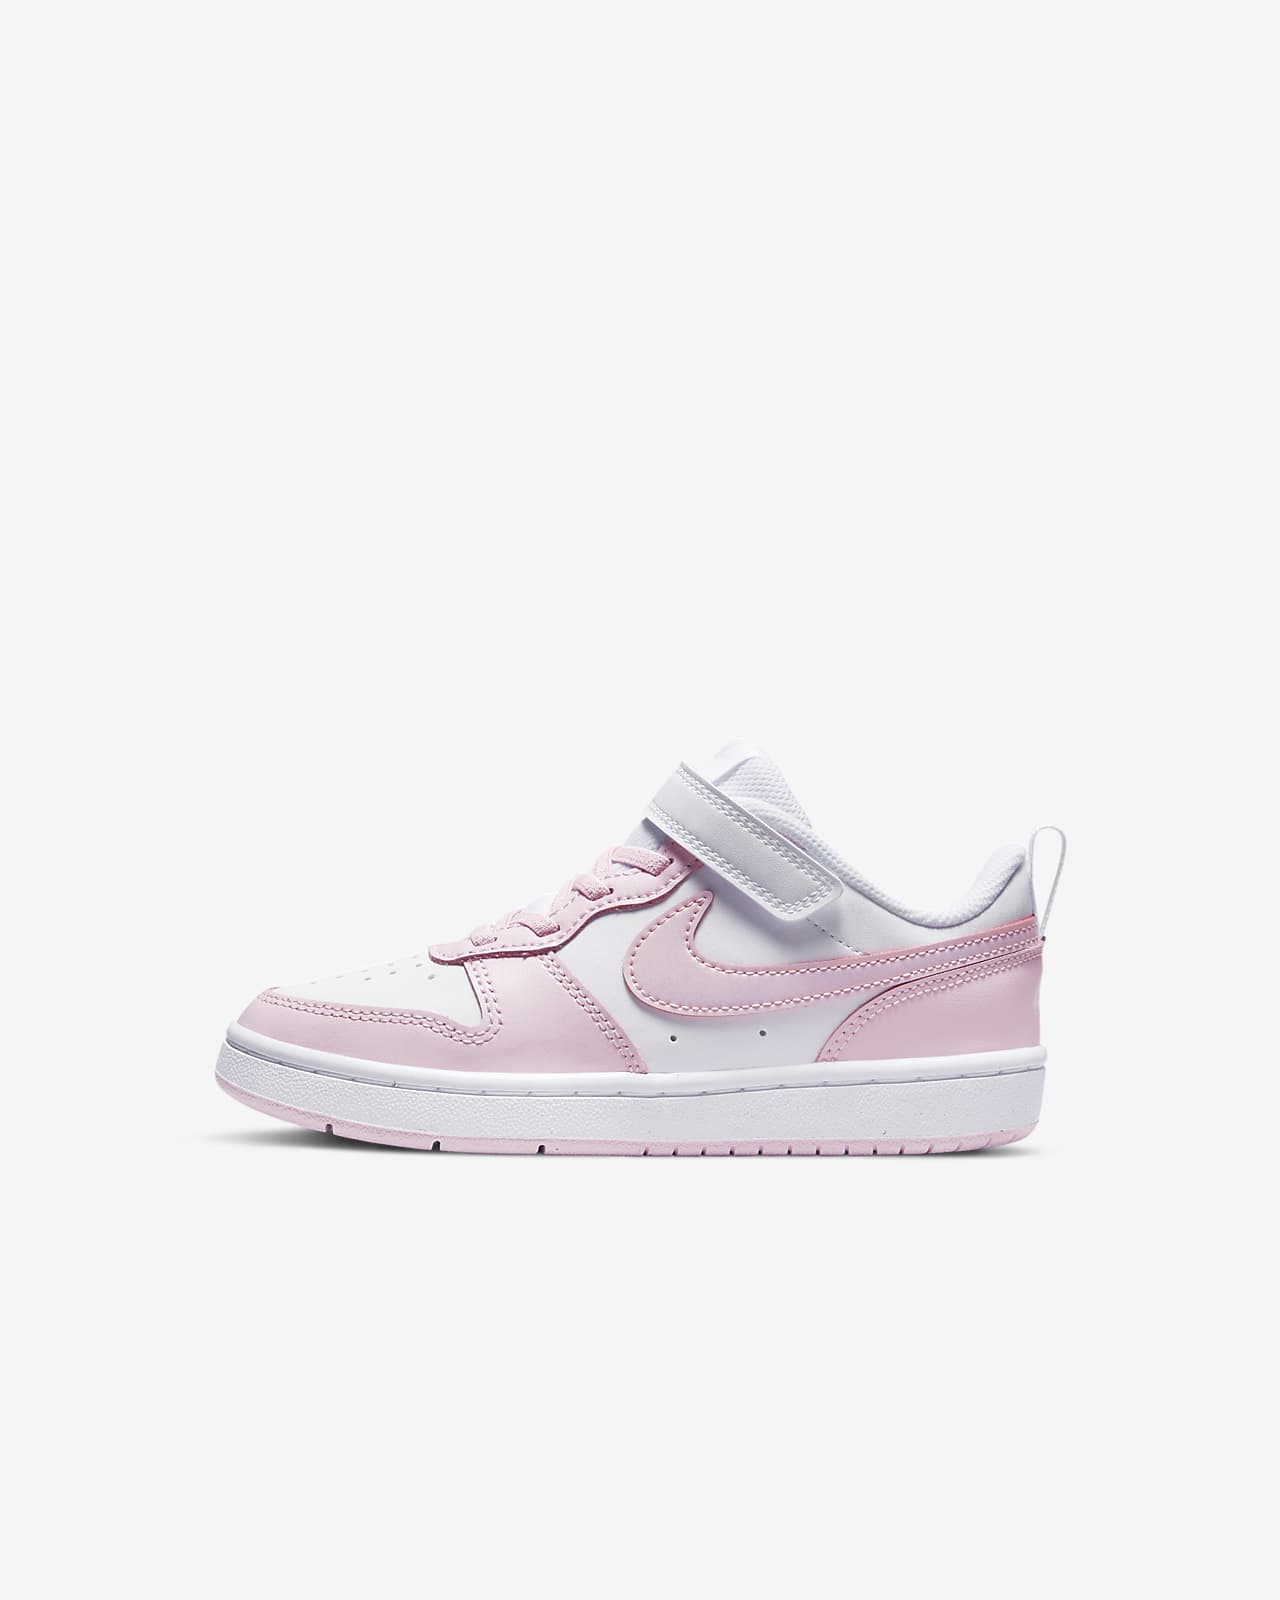 Chaussure Nike Court Low 2 pour Nike